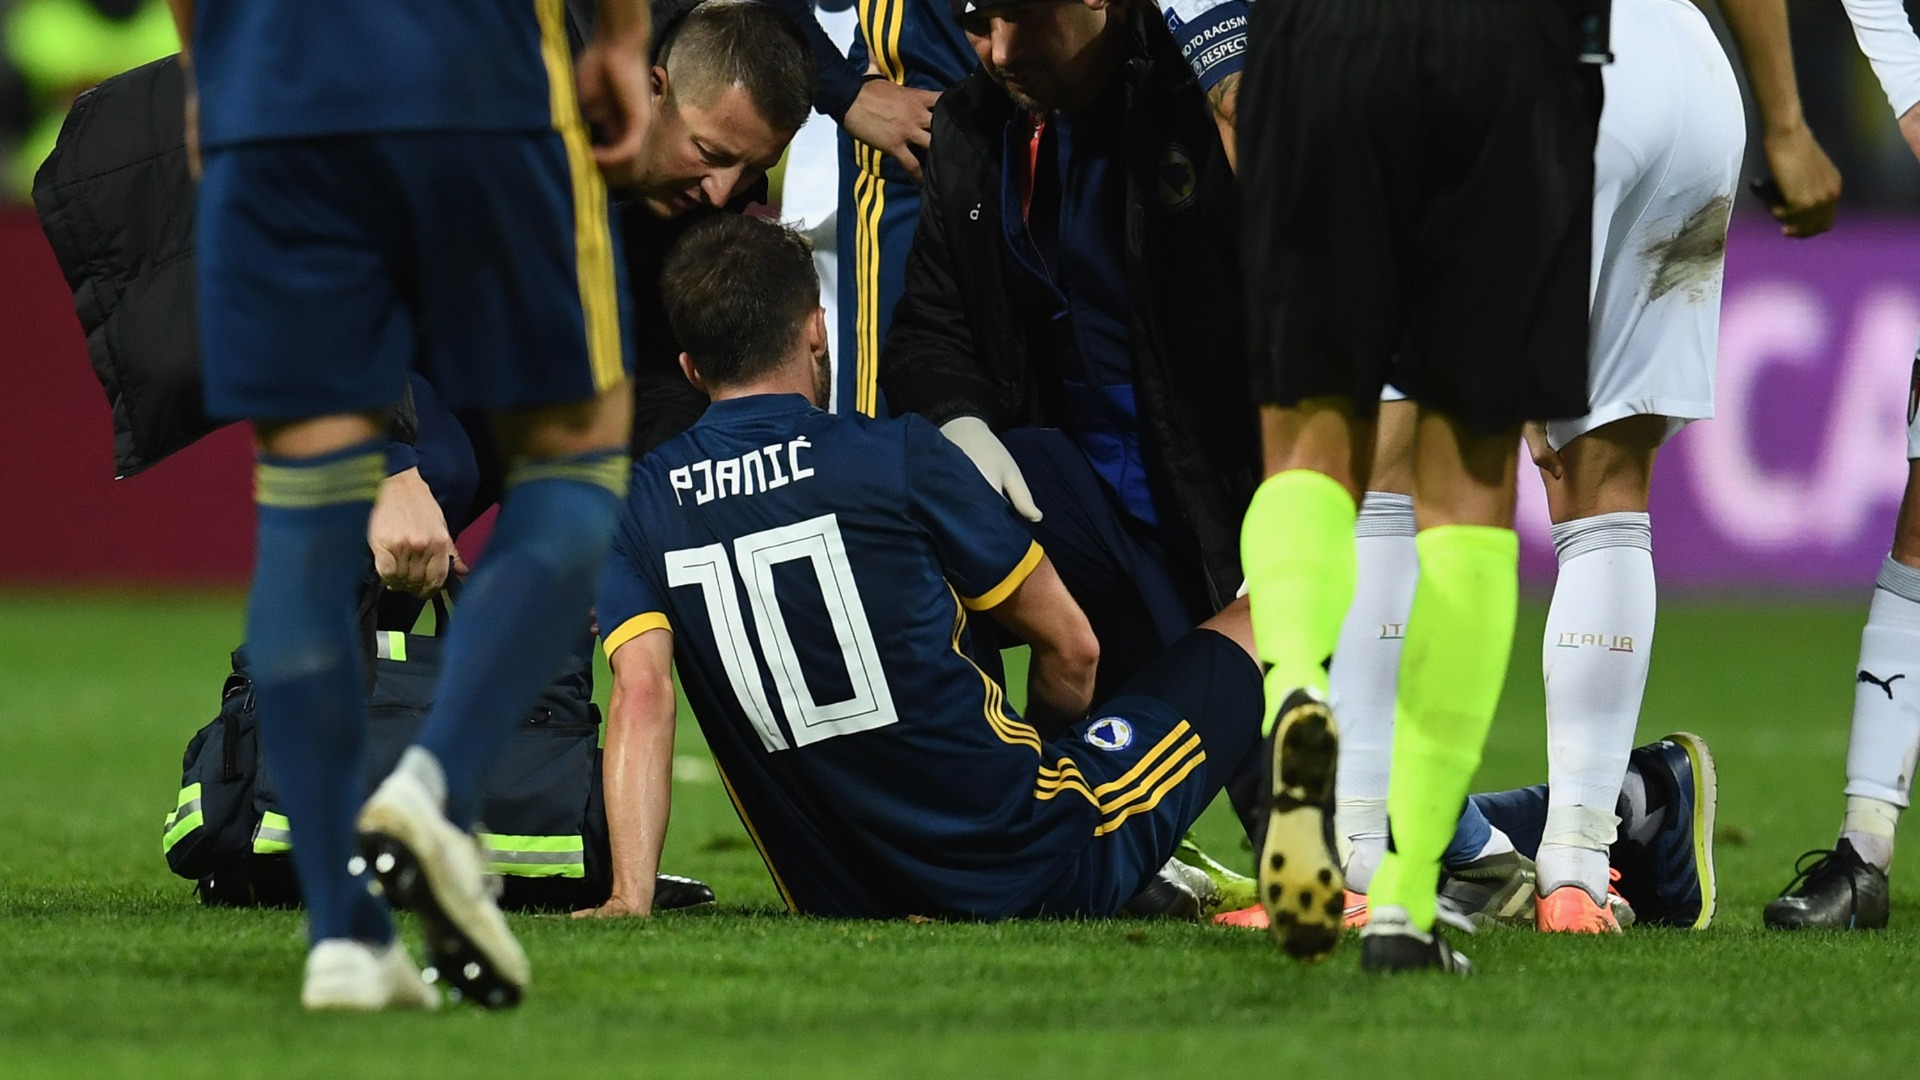 Bosnia confirms Pjanic injury against Italy